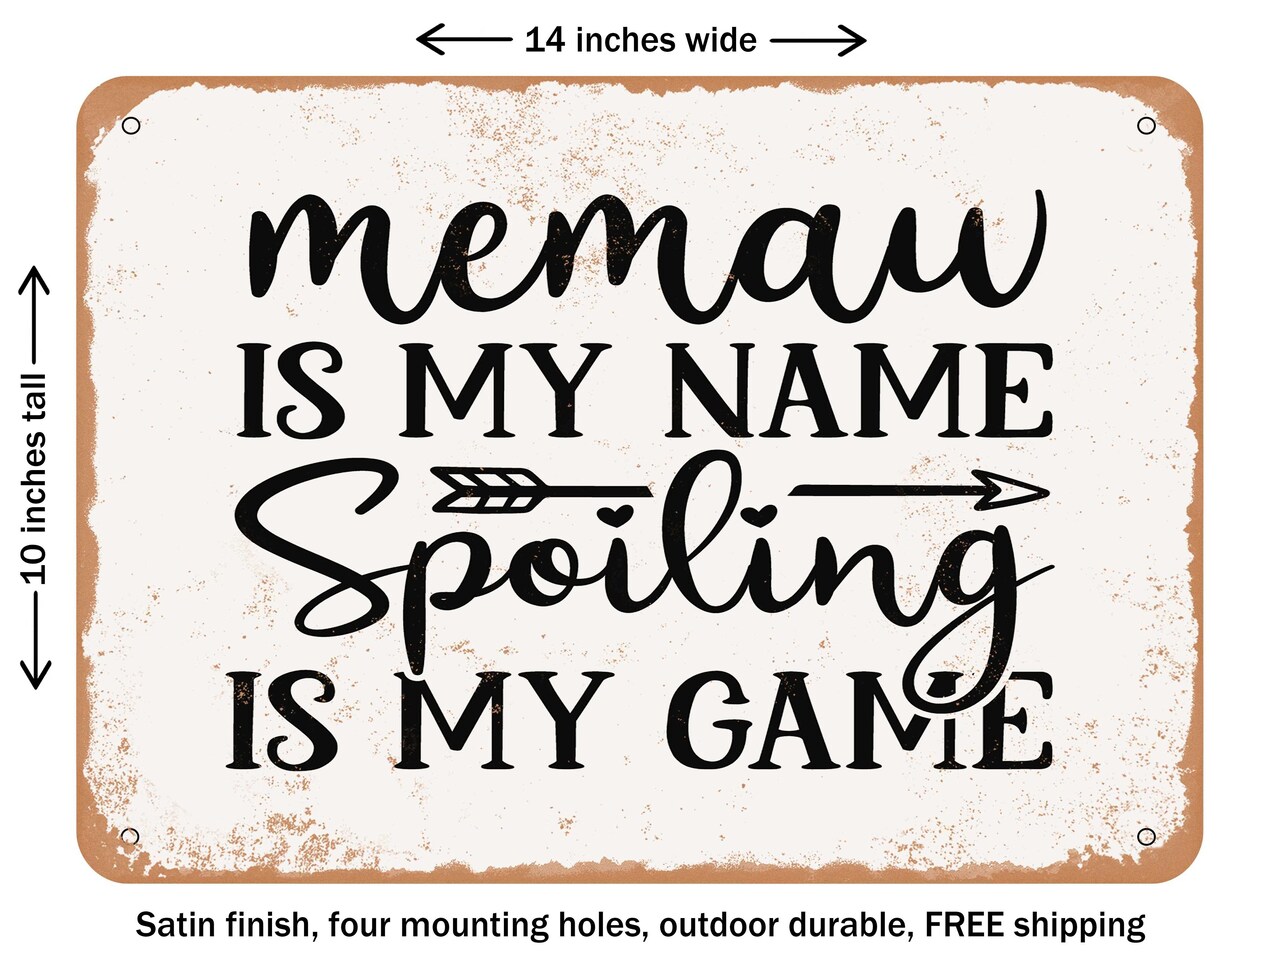 DECORATIVE METAL SIGN - Memaw is My Name Spoiling is My Game - 2 - Vintage Rusty Look